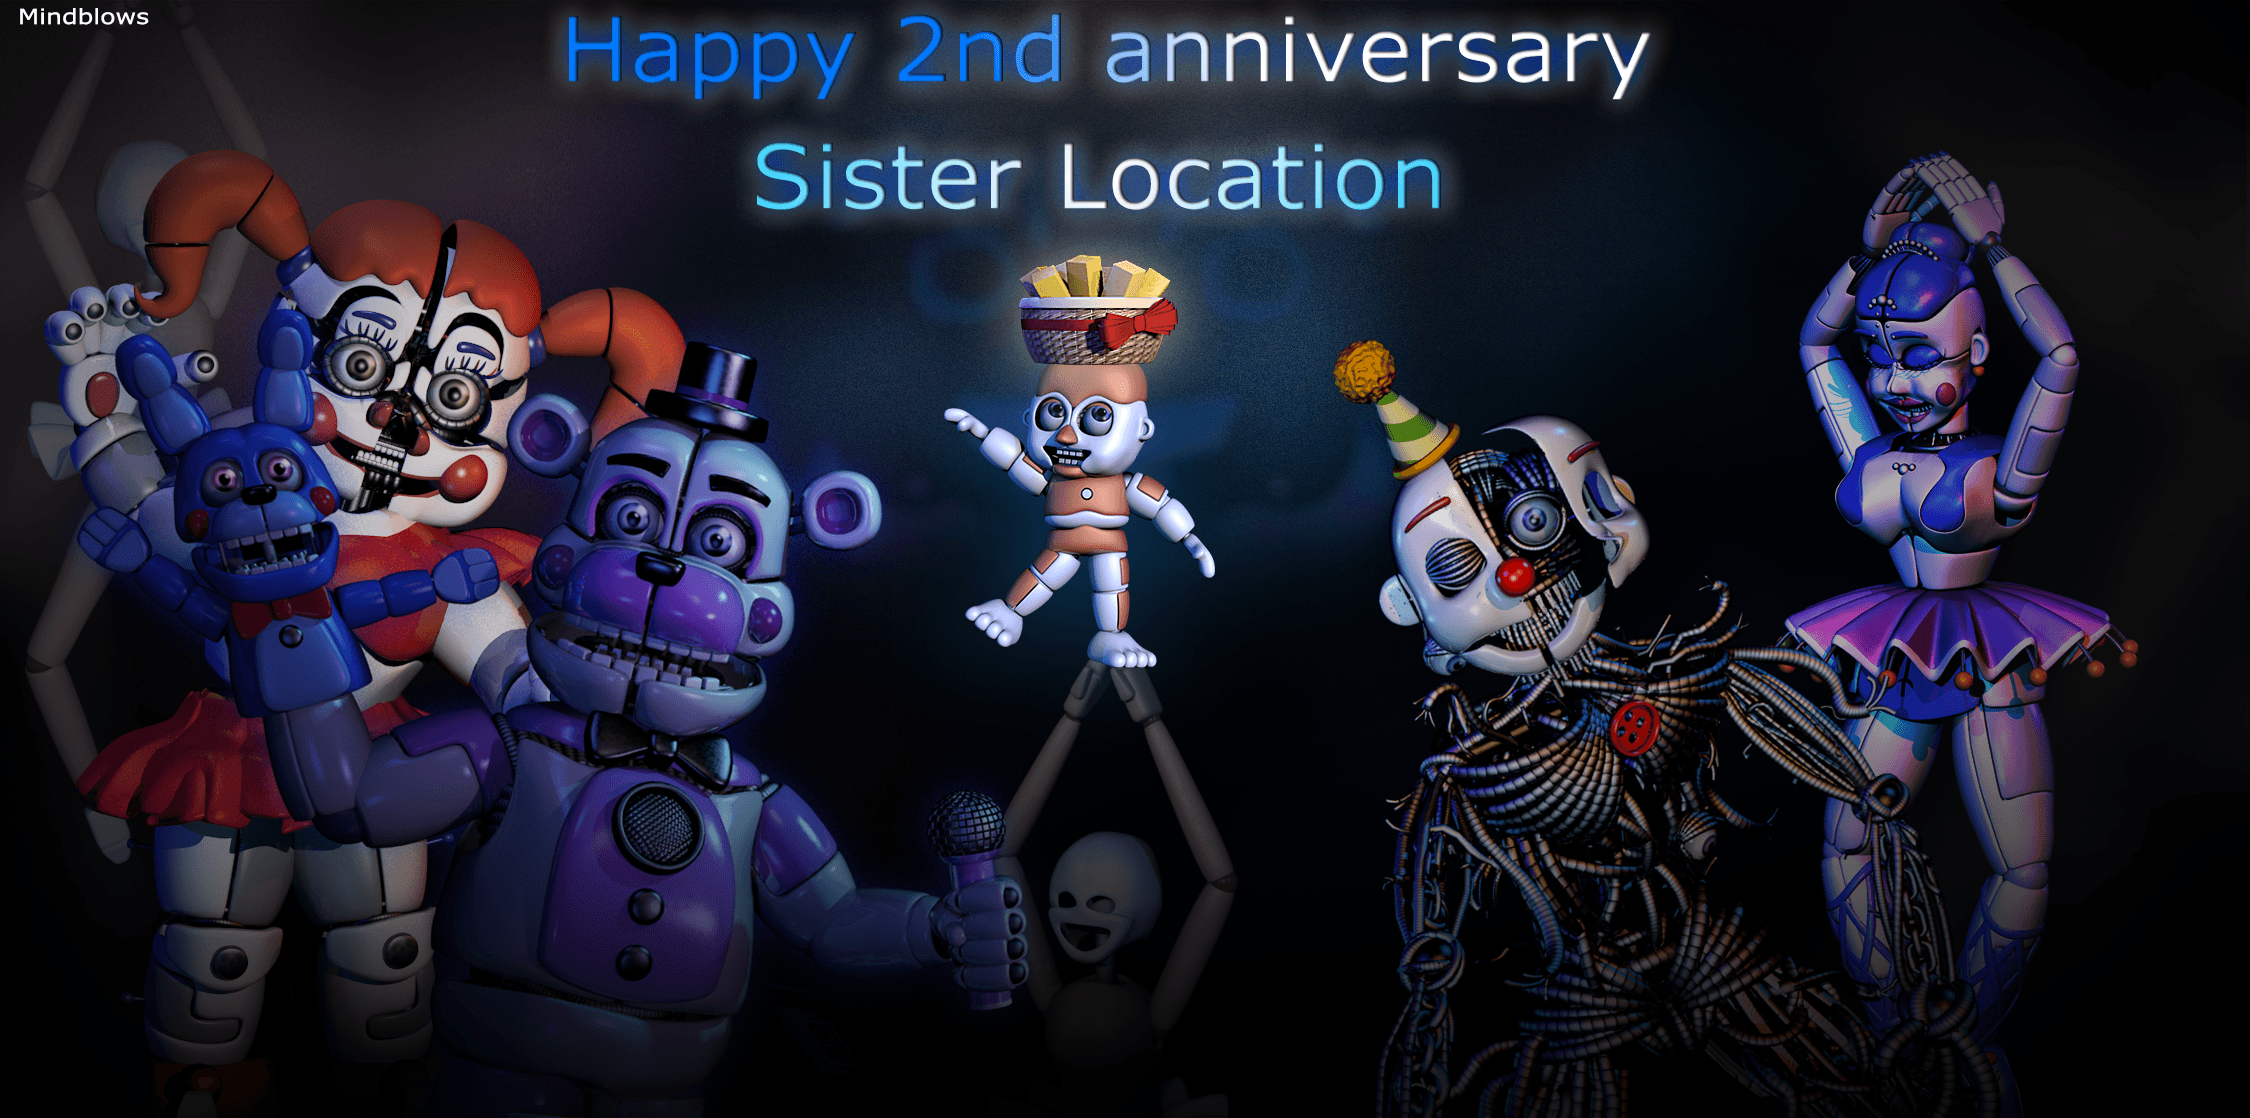 Five Nights At Freddy's Sister Location year Anniversary